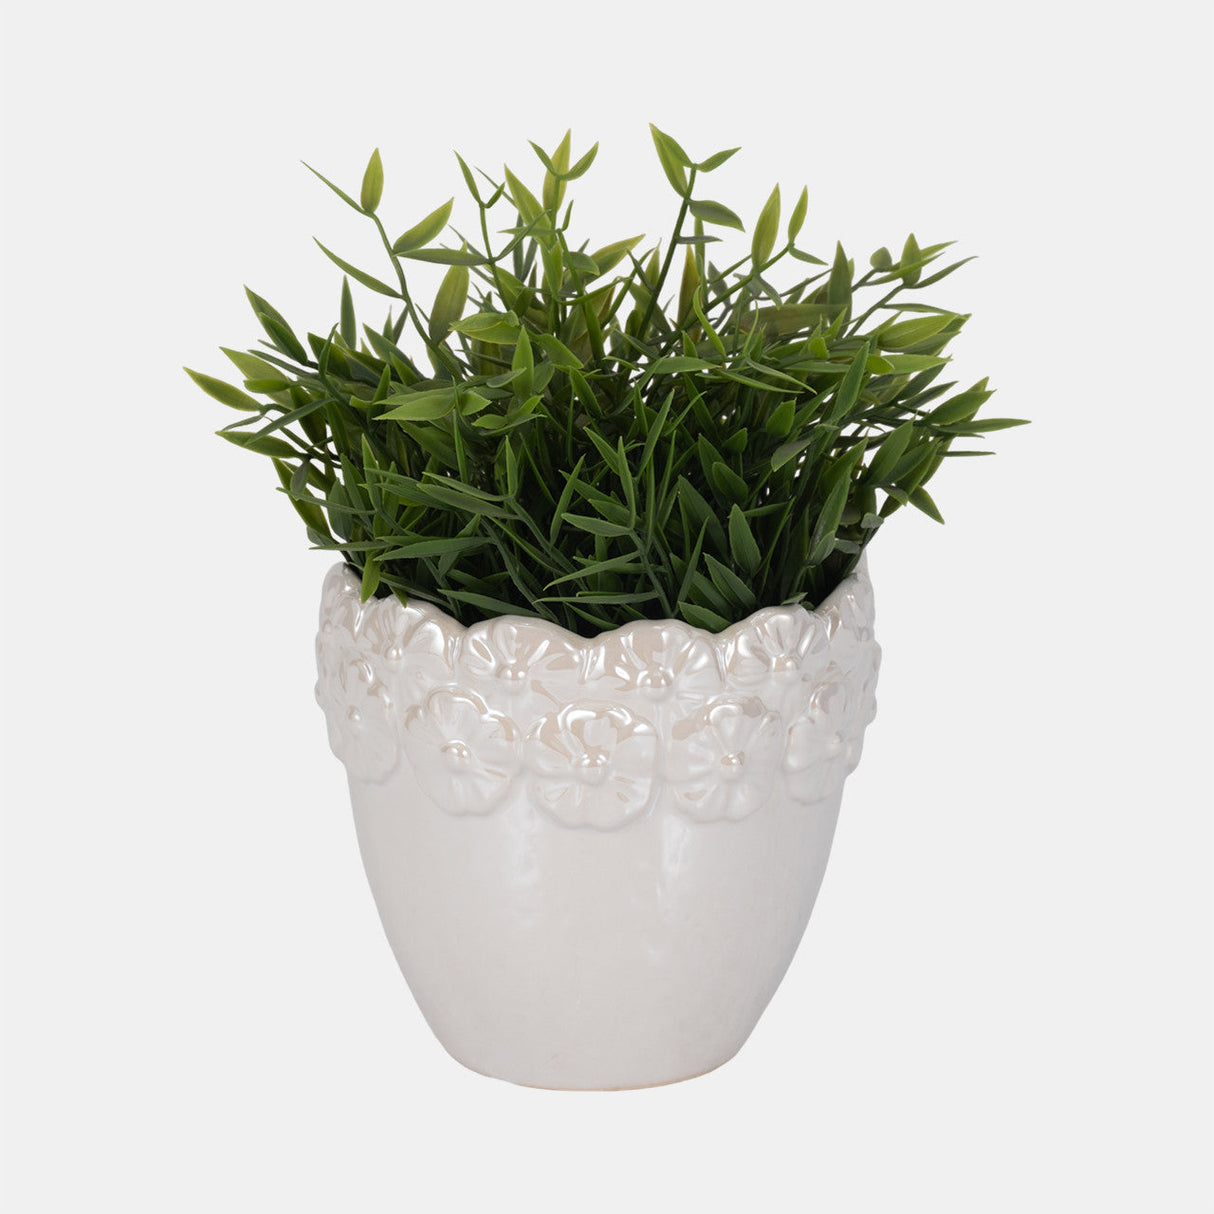 6" Iridescent Floral Crown Planter, Ivory